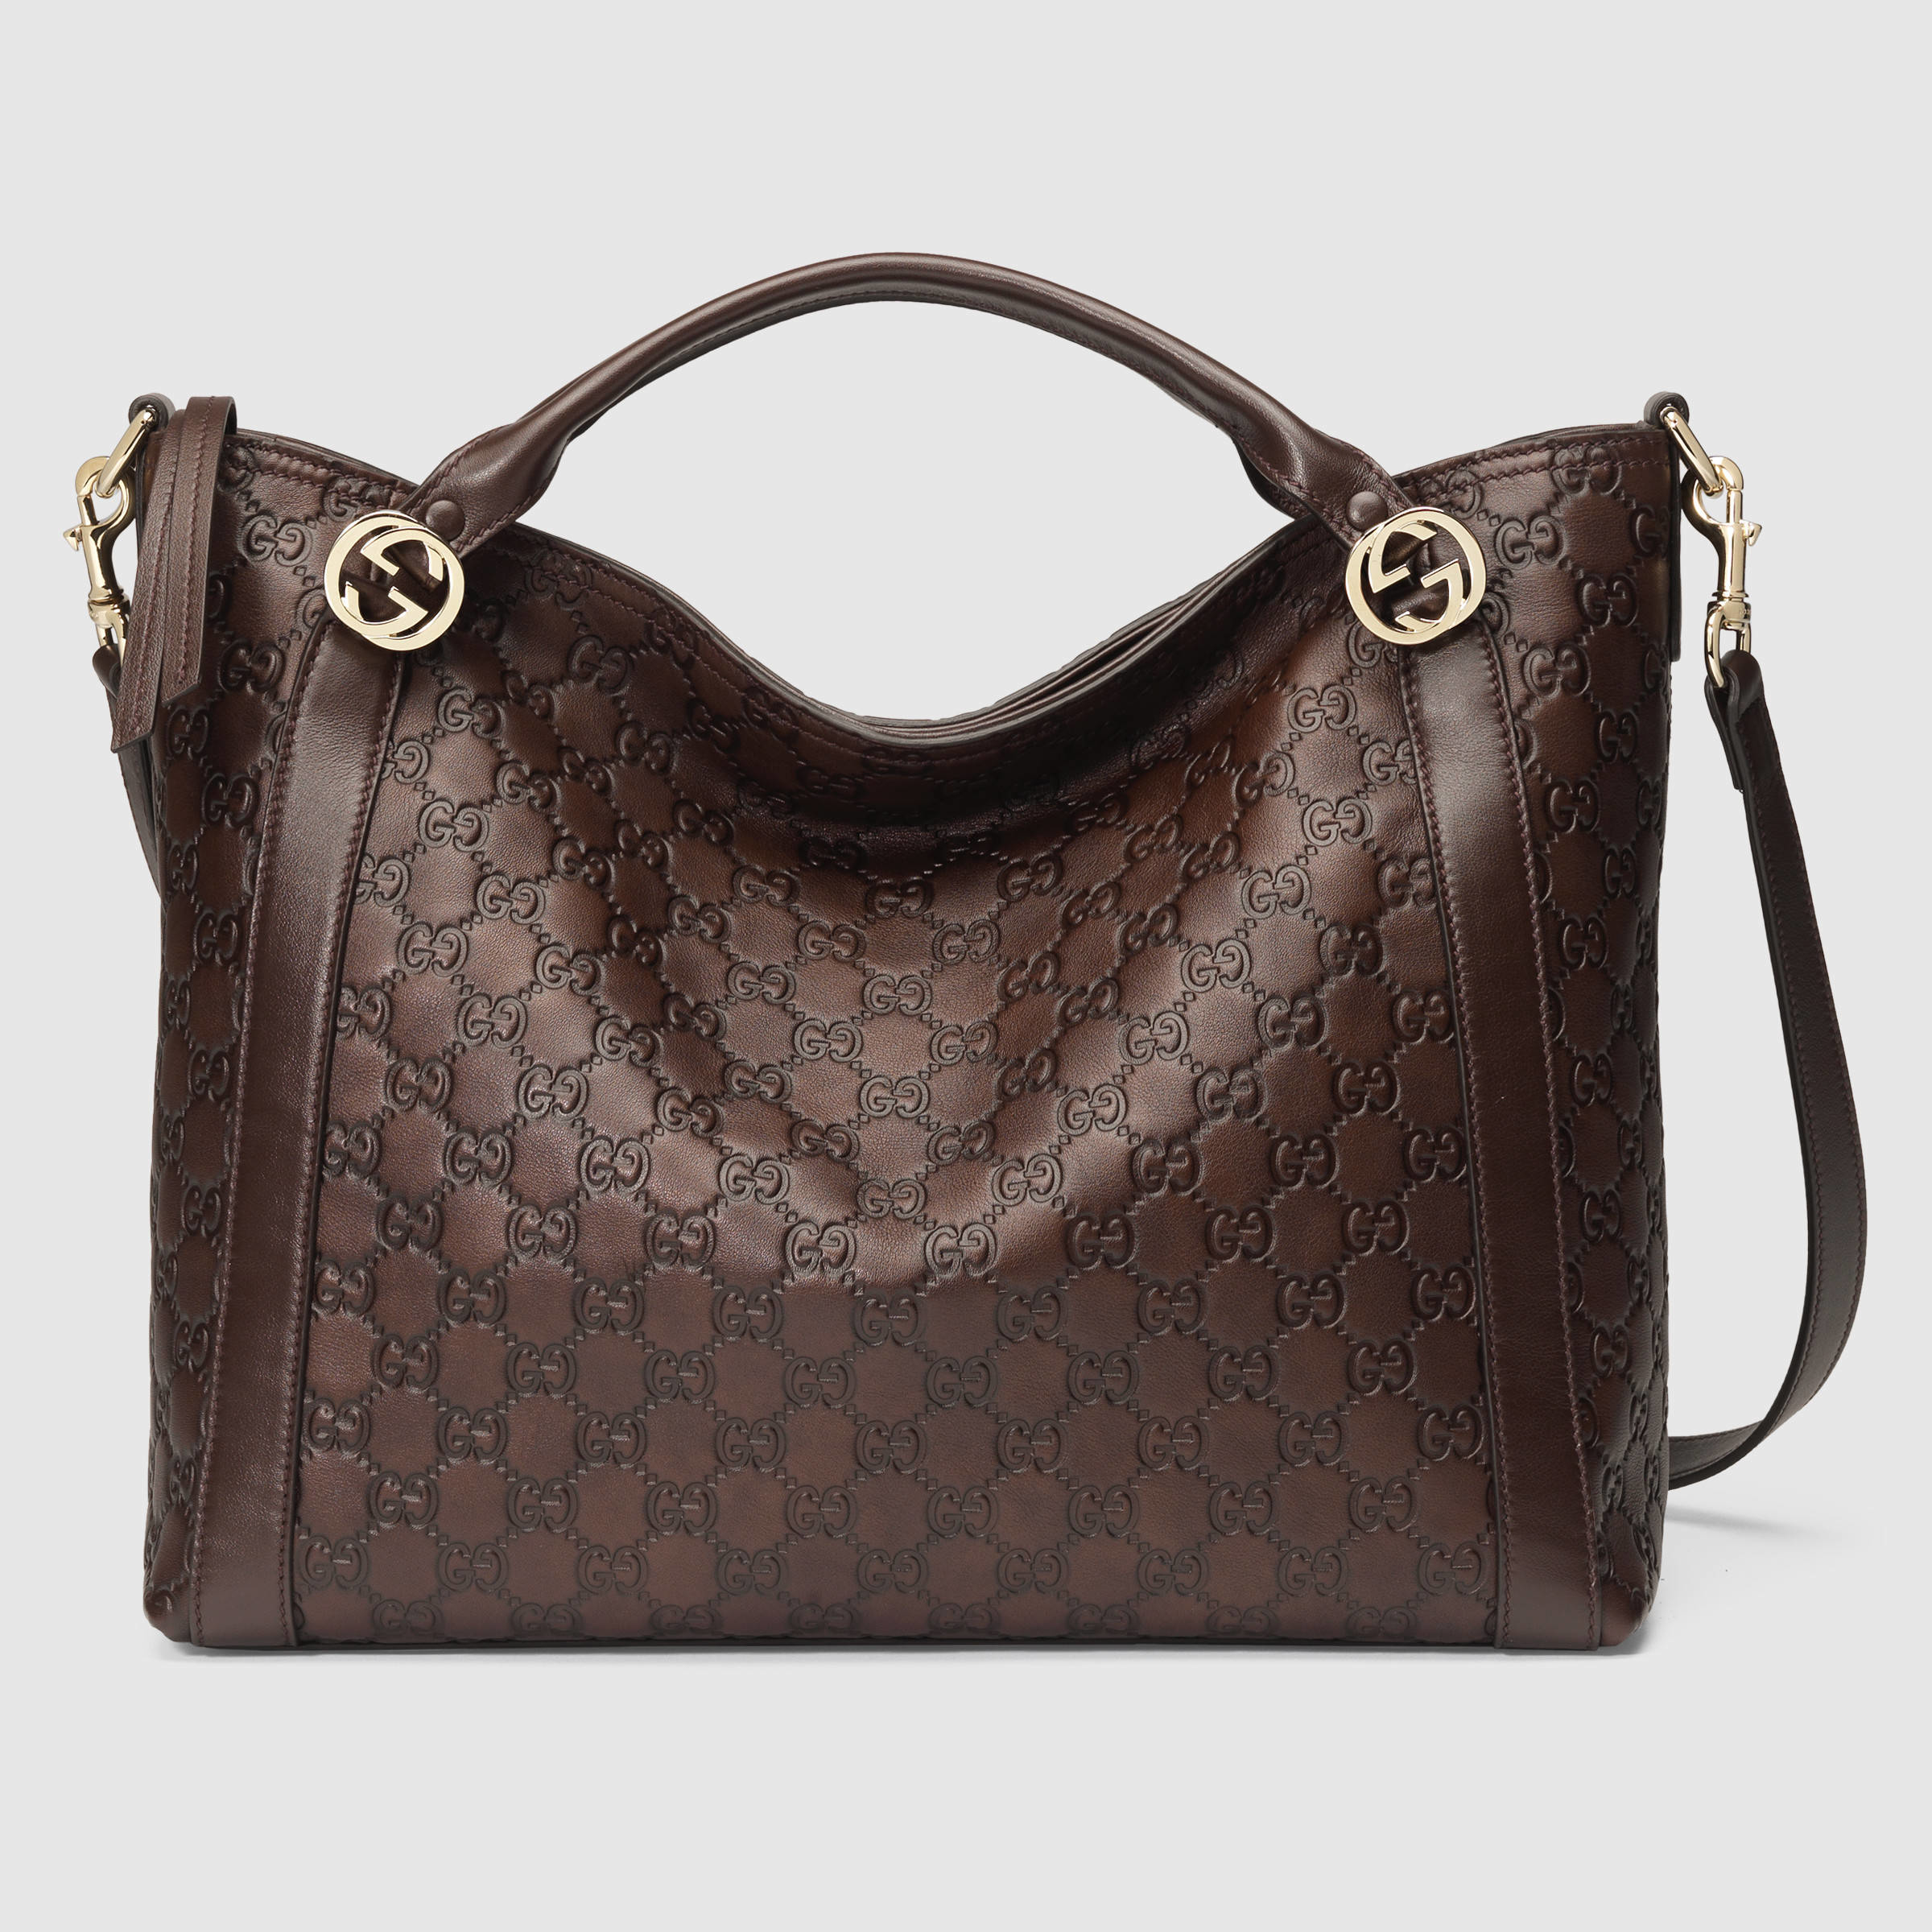 Lyst - Gucci Handbag With Removable Shoulder in Brown